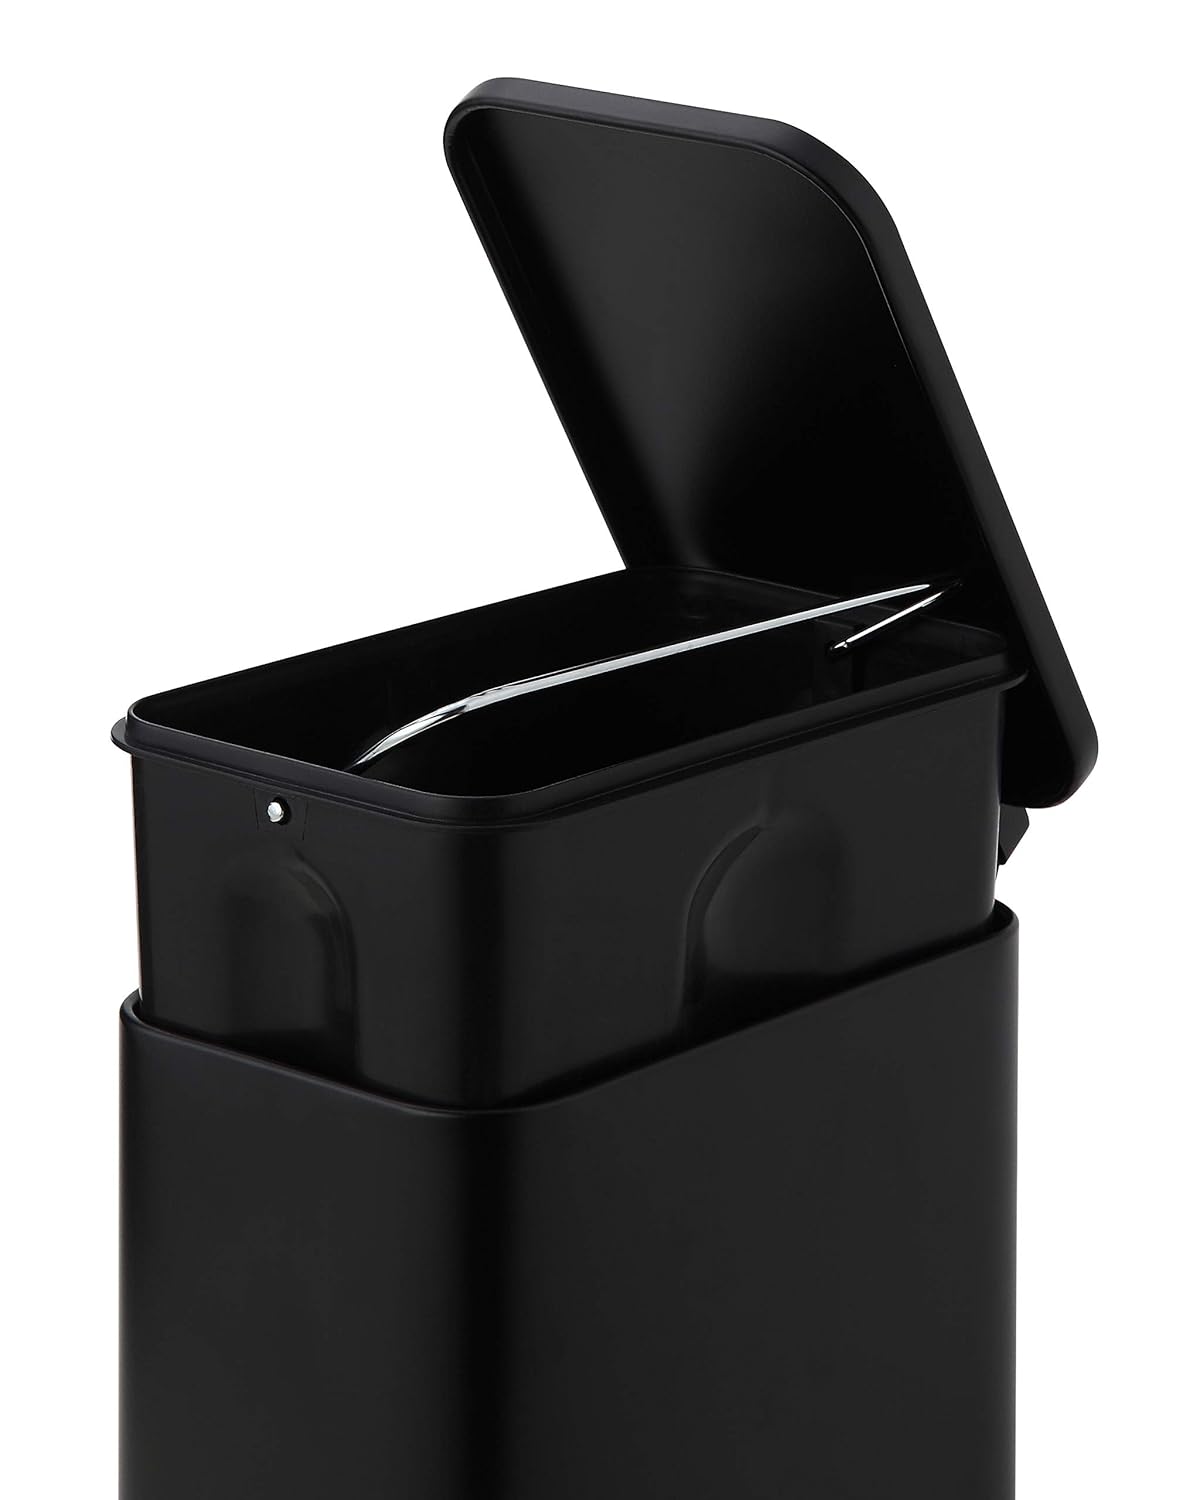 SunnyPoint JM-TCAN-BLK 5 Liter / 1.32 Gallon Trash Can with Plastic Inner Bucket